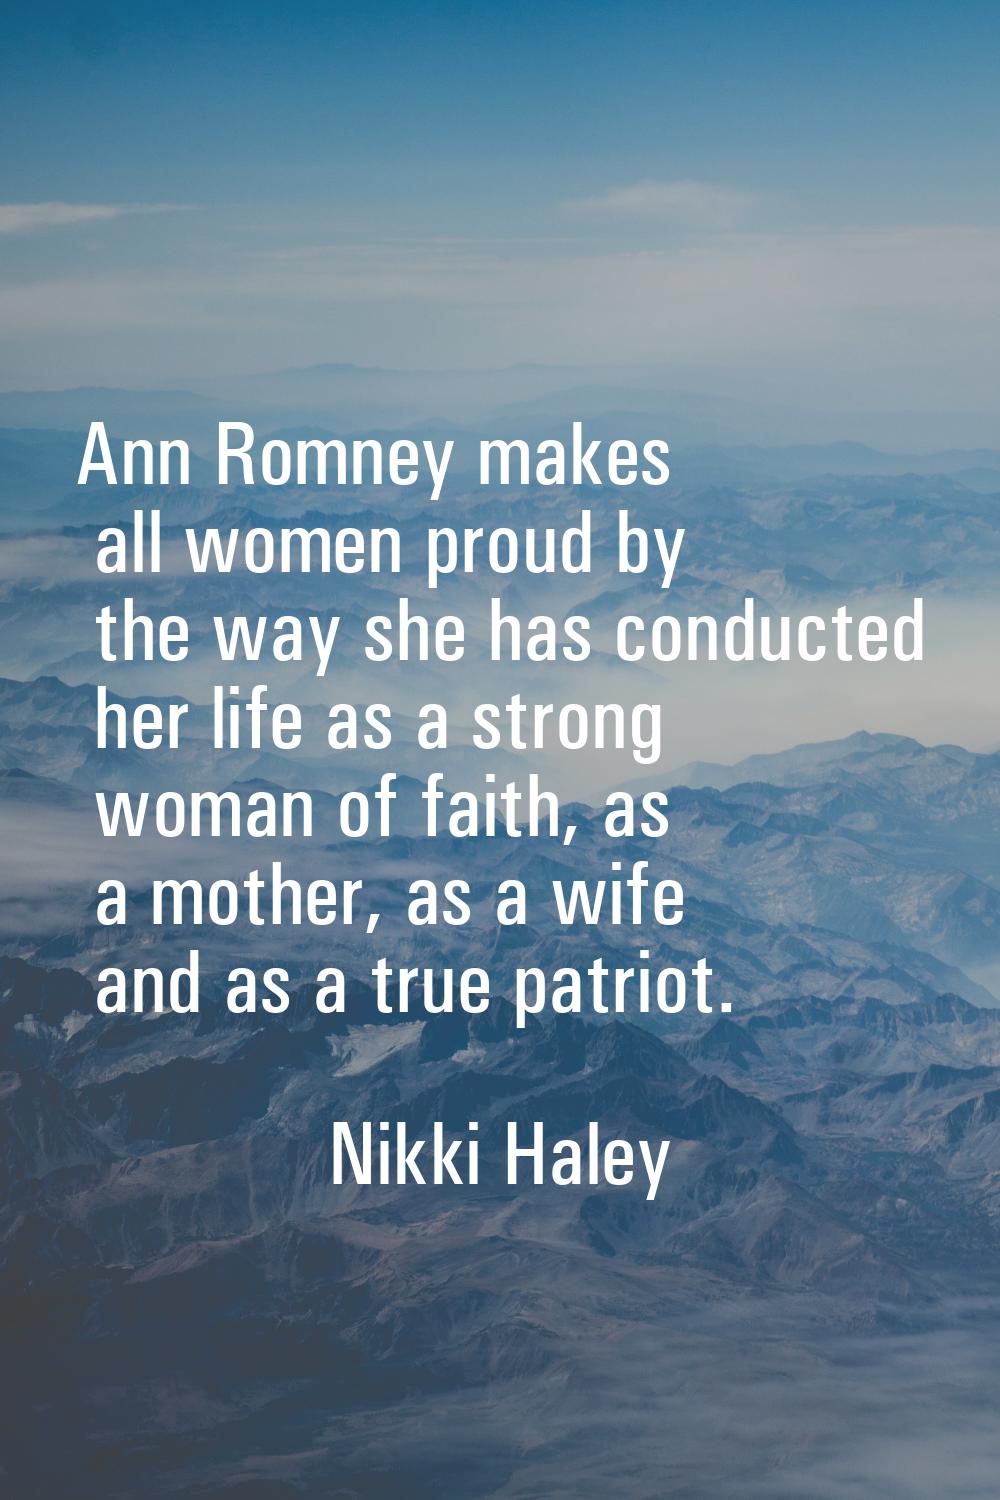 Ann Romney makes all women proud by the way she has conducted her life as a strong woman of faith, 